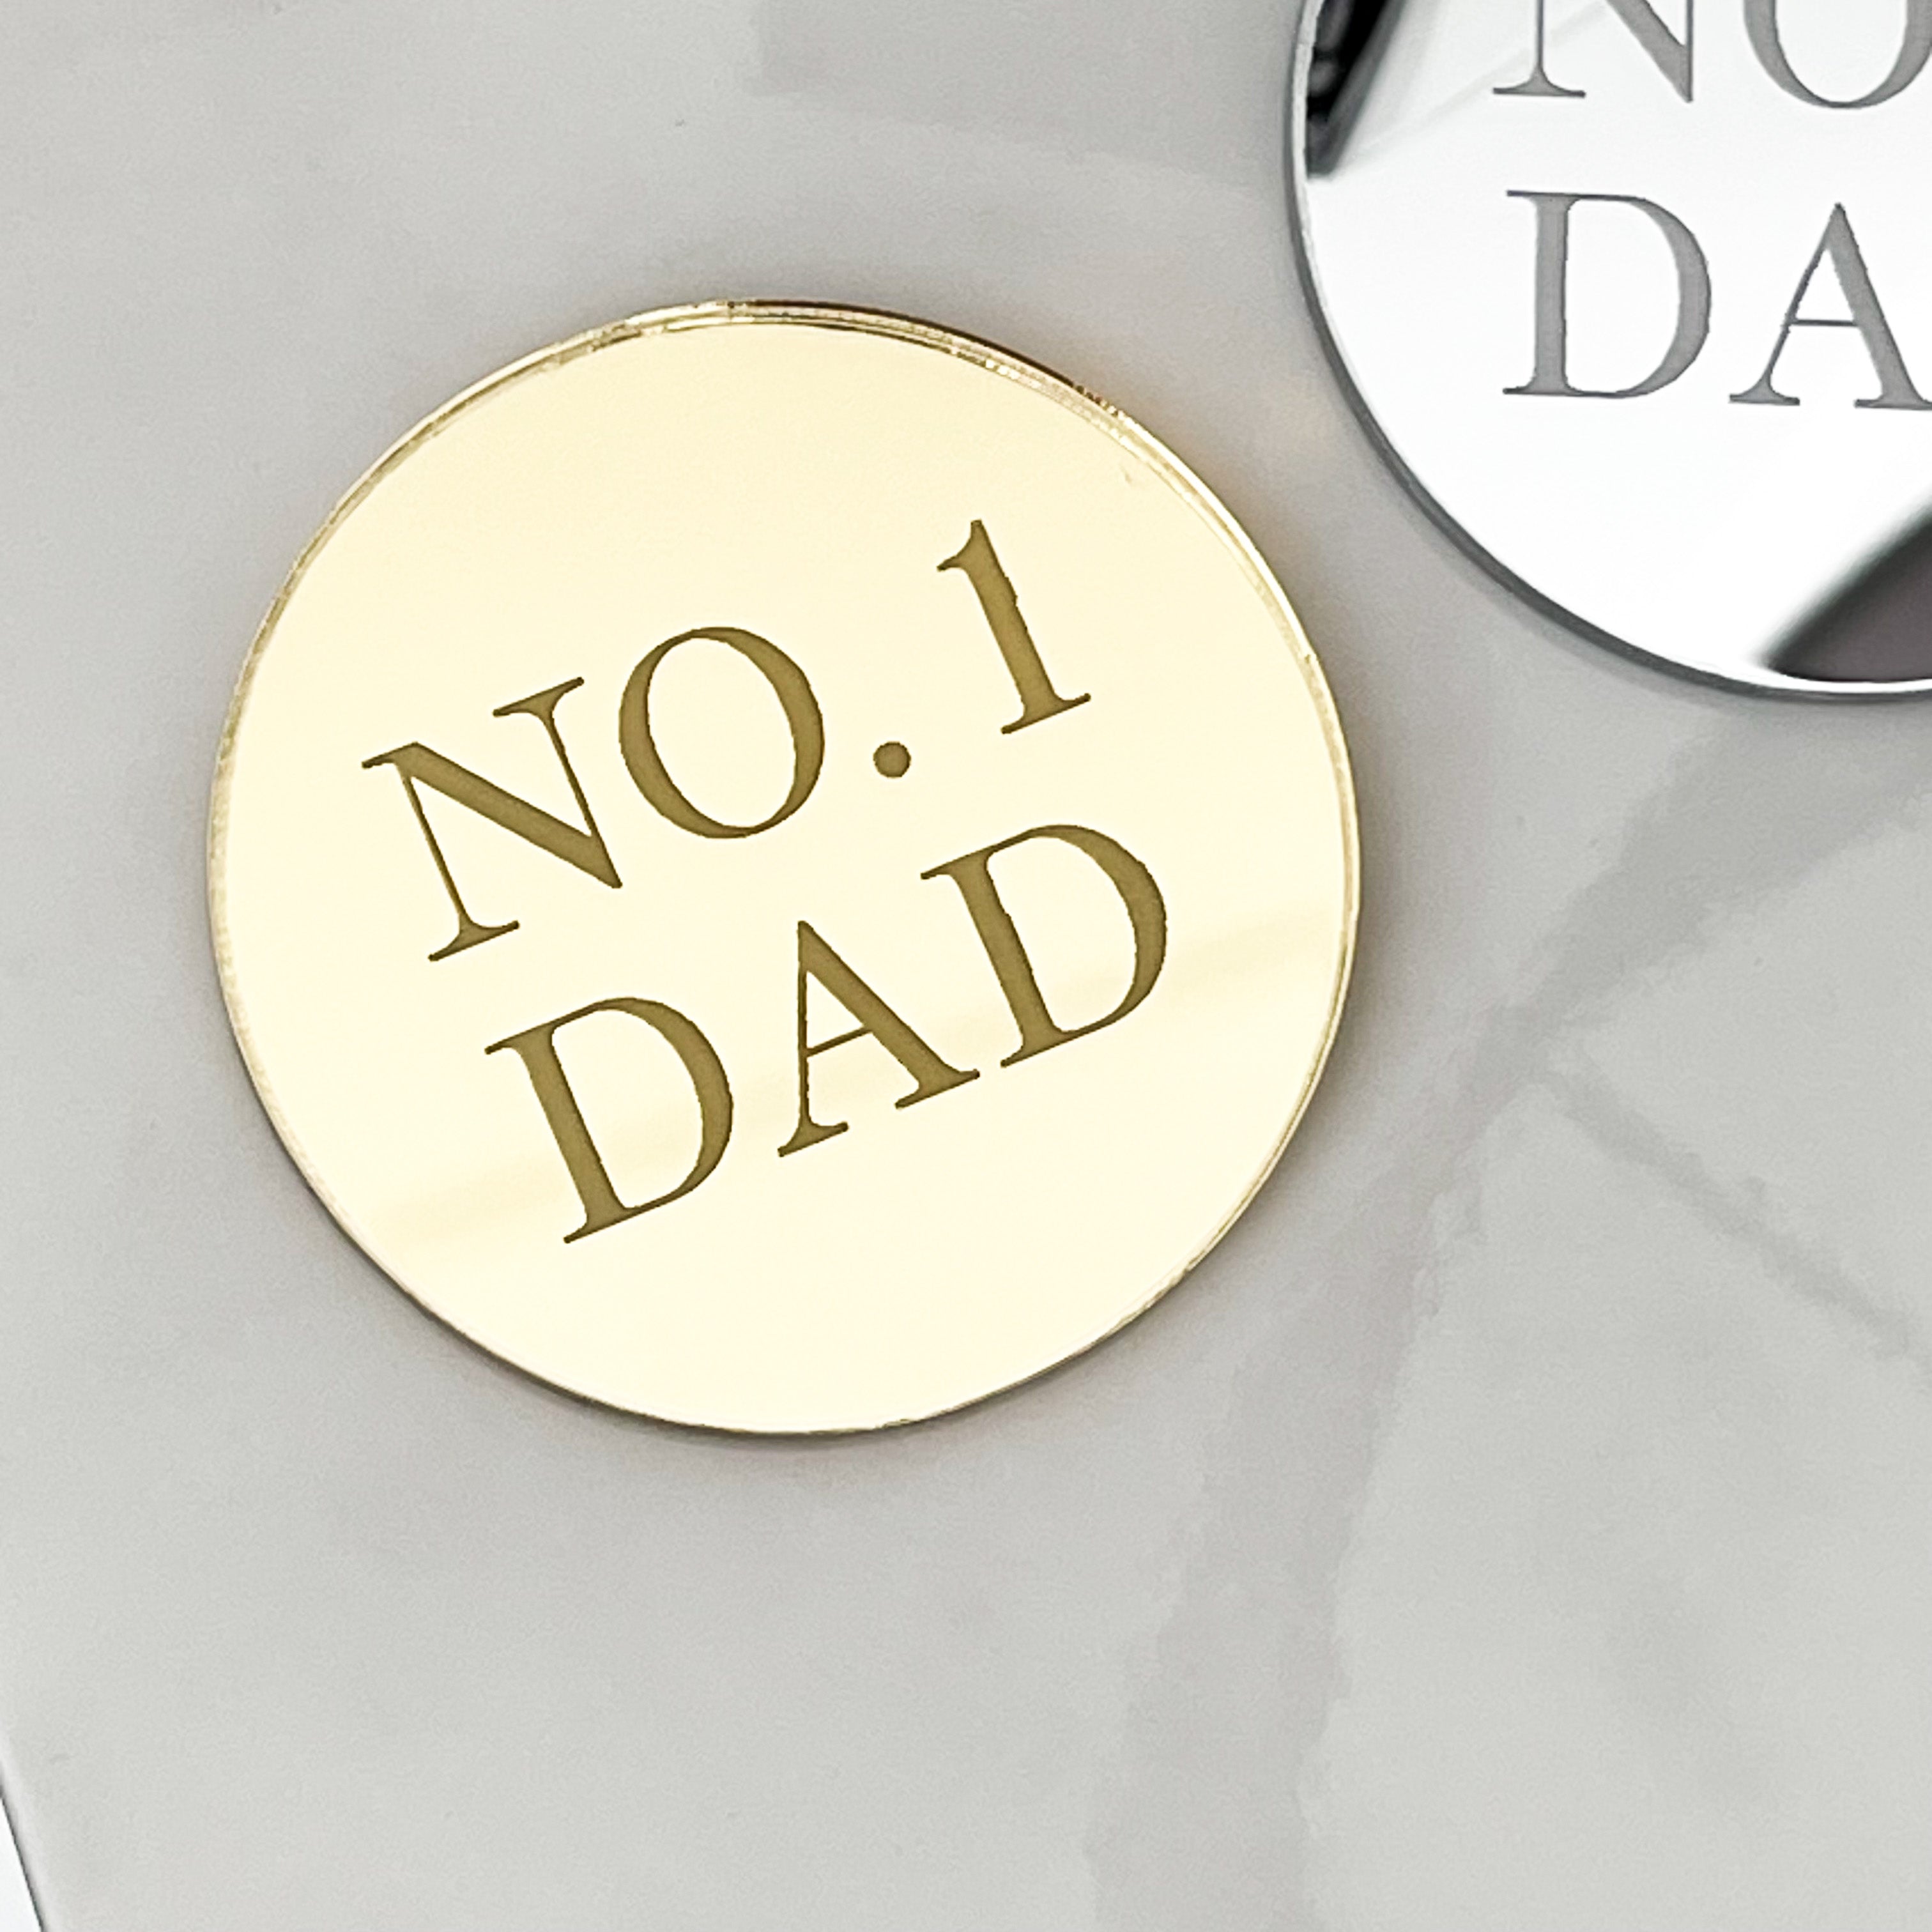 No. 1 Dad Father's Day Engraved Cake Charm